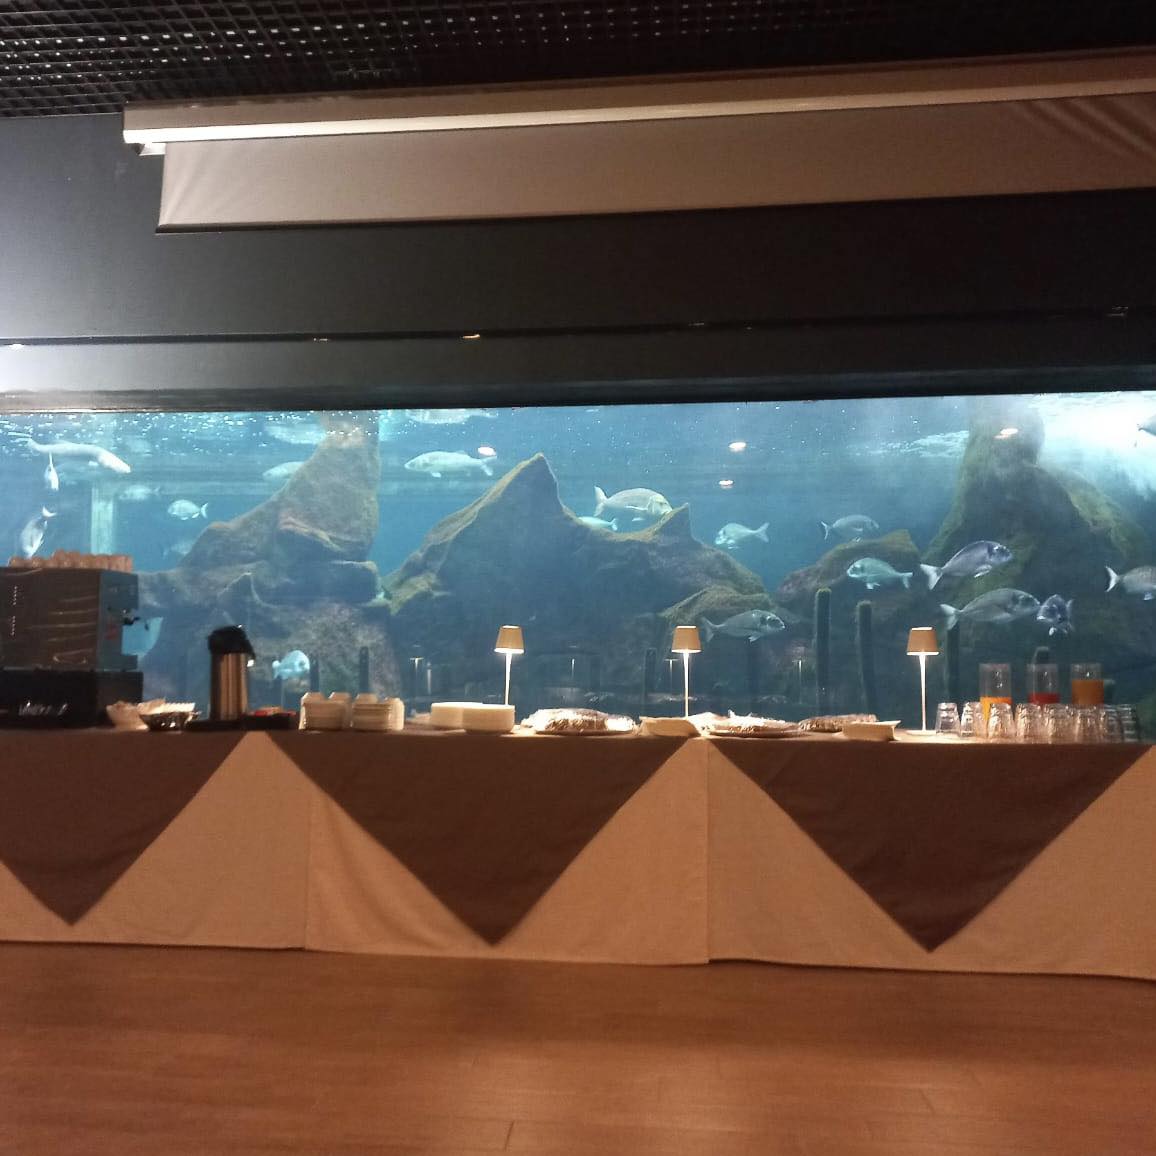 Eh si … è un acquario …..
.
.
.
.
.
.
#catering #buffet #cateringservice  #catering #cateringservice #cateringevent #lunch #cantierecucinapisa #besties #bestoftheday #chill #chilling #cool #crazy #festa #friend #friends #fun #funtime #funtimes #girls #goodtime #goodtimes #guys #happy #instafun #instagood #instaparty #love #memories #music #night